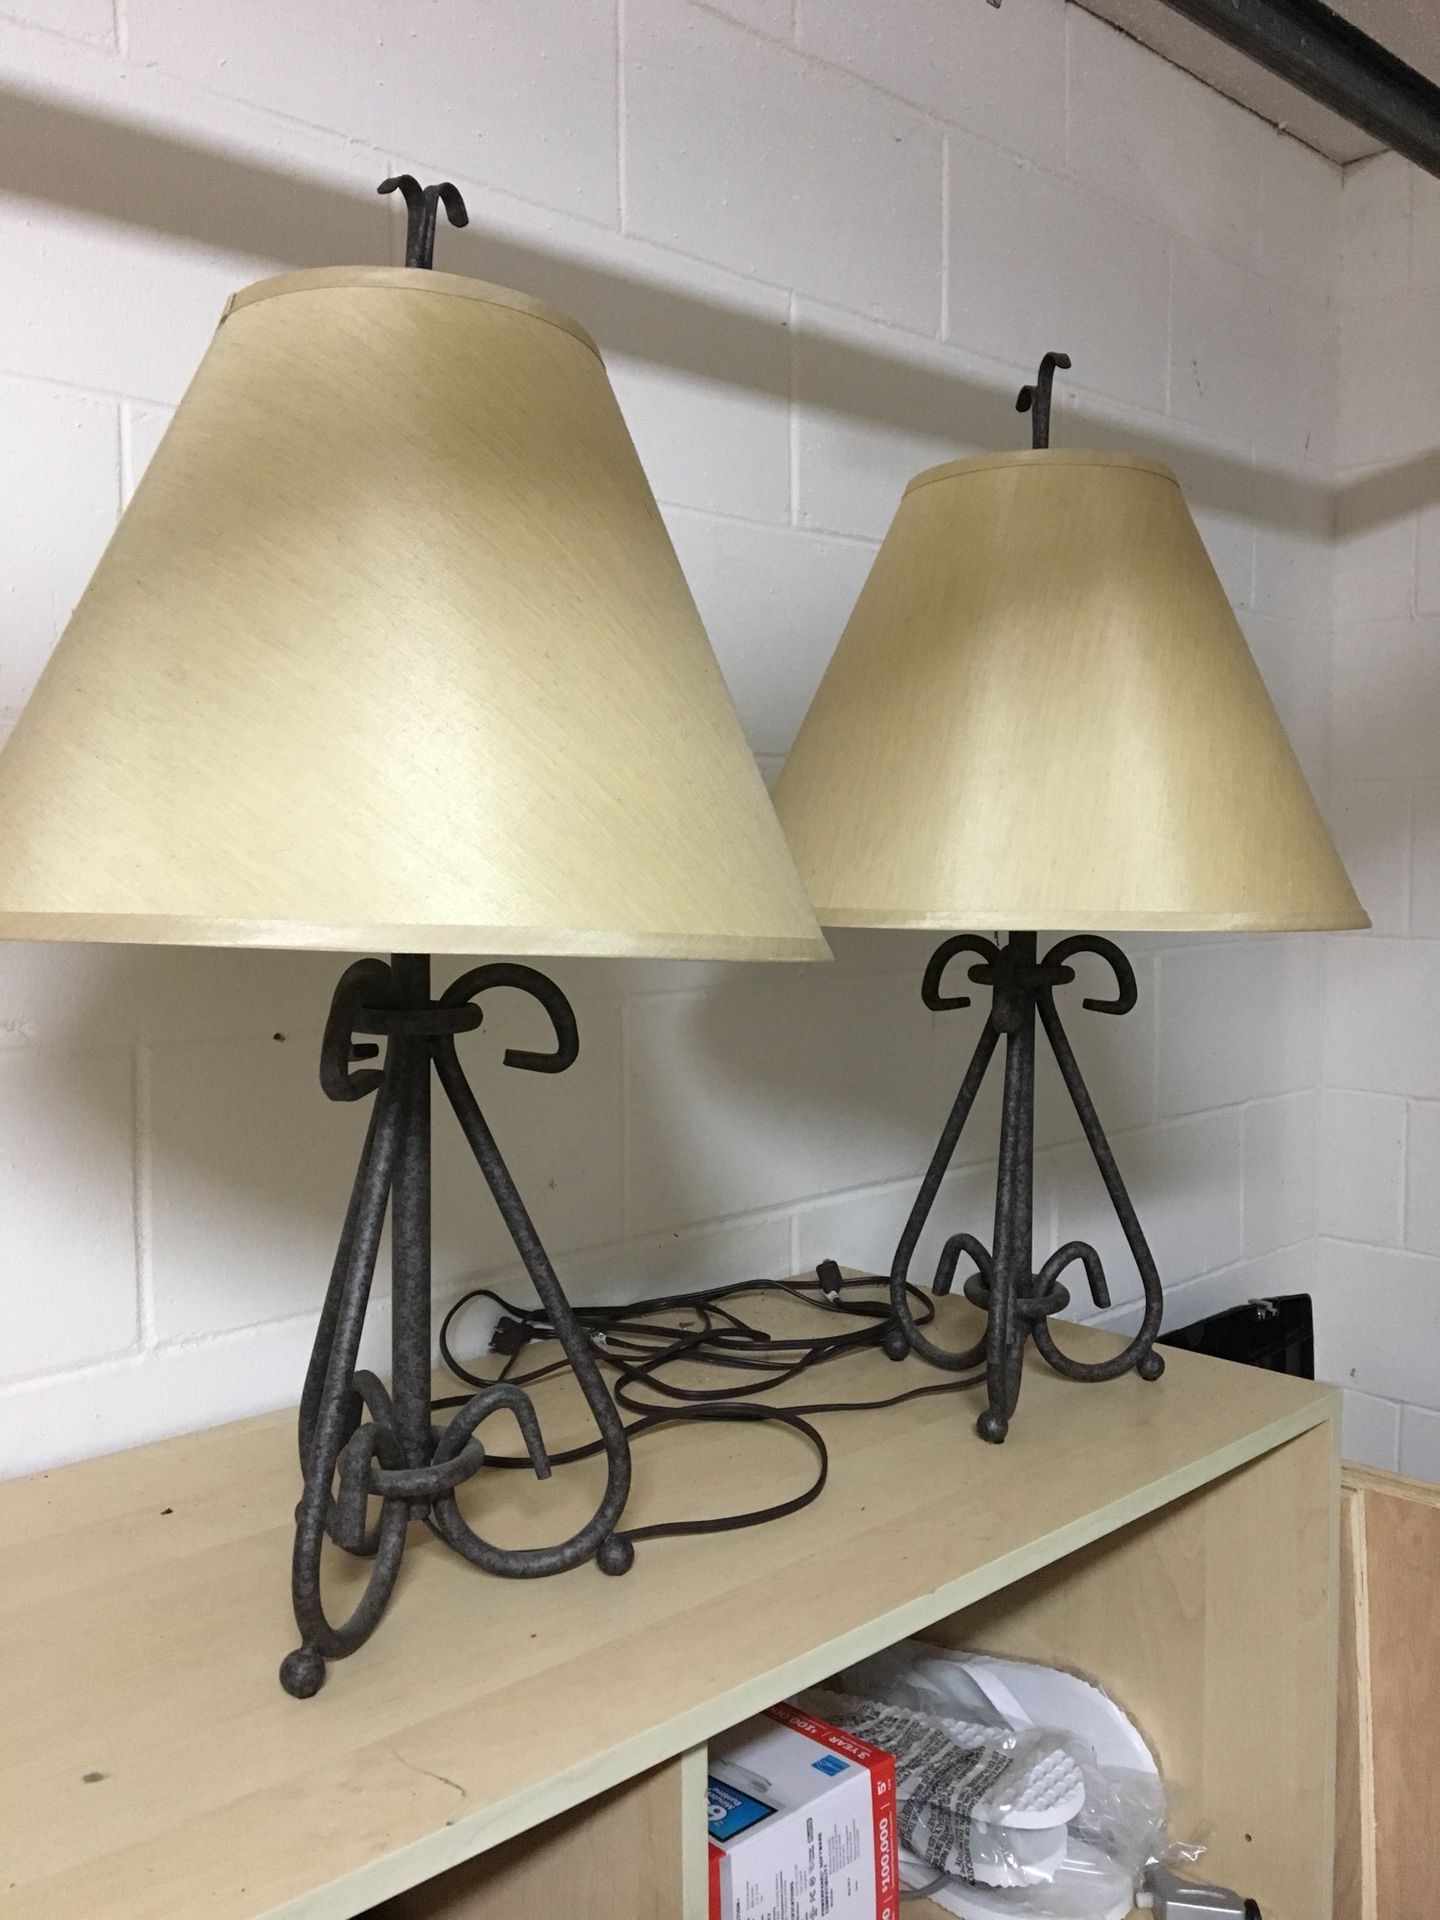 2 End Table Lamps 28” y’all and 16” wide at shade